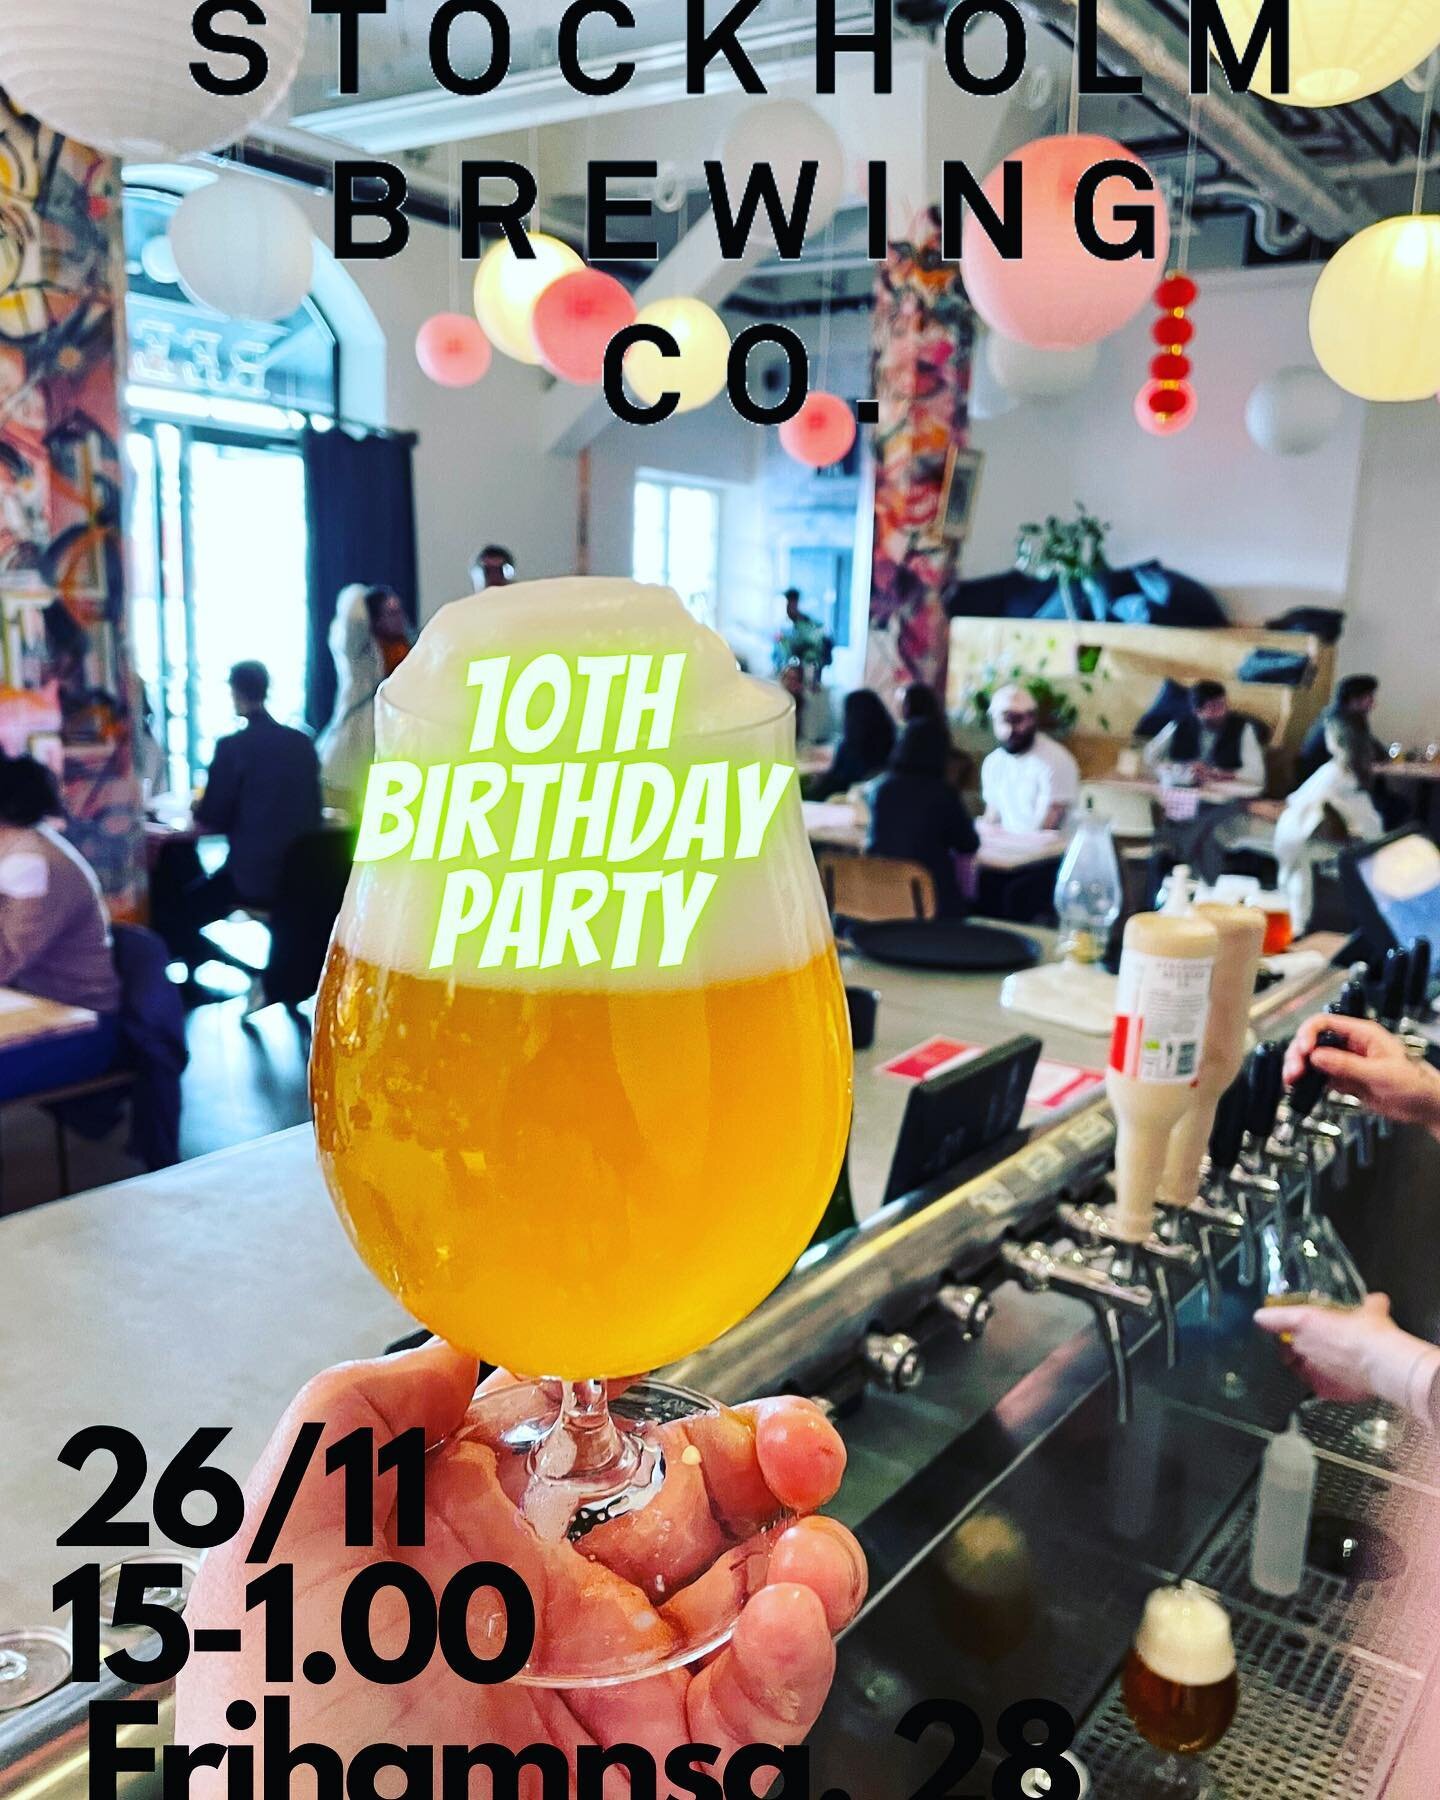 Save the date: 26/11 - 10th Anniversary Party down @taproom_sthlmbrewing_co 
Expect delicious food, classic beers and some brewers on the turntables!
Come and help us celebrate entering double digits.